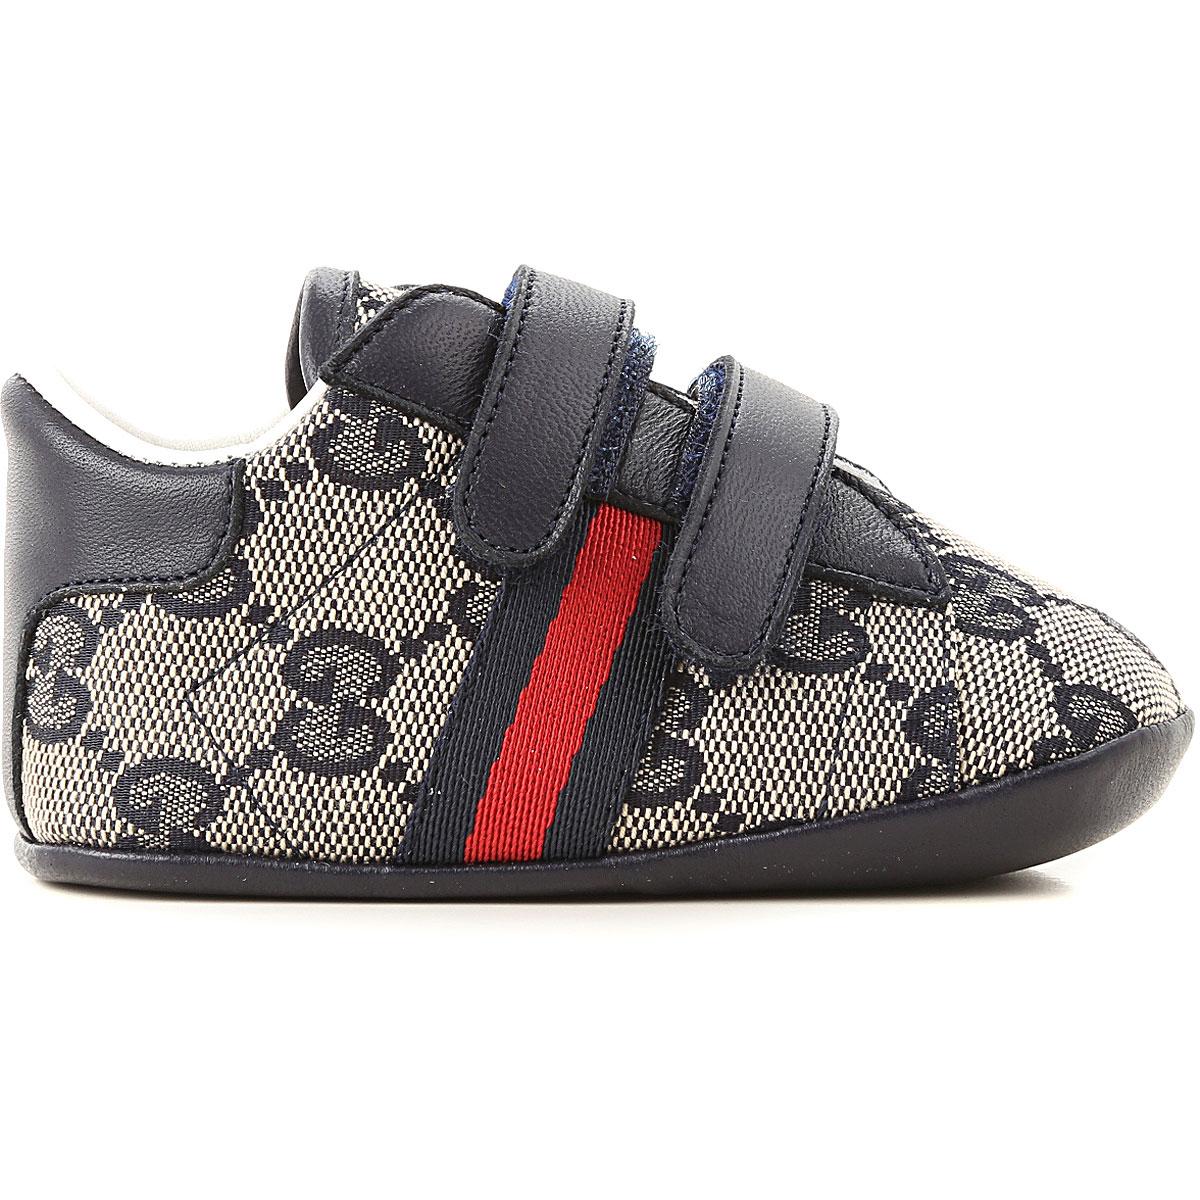 gucci baby boy clothes outlet